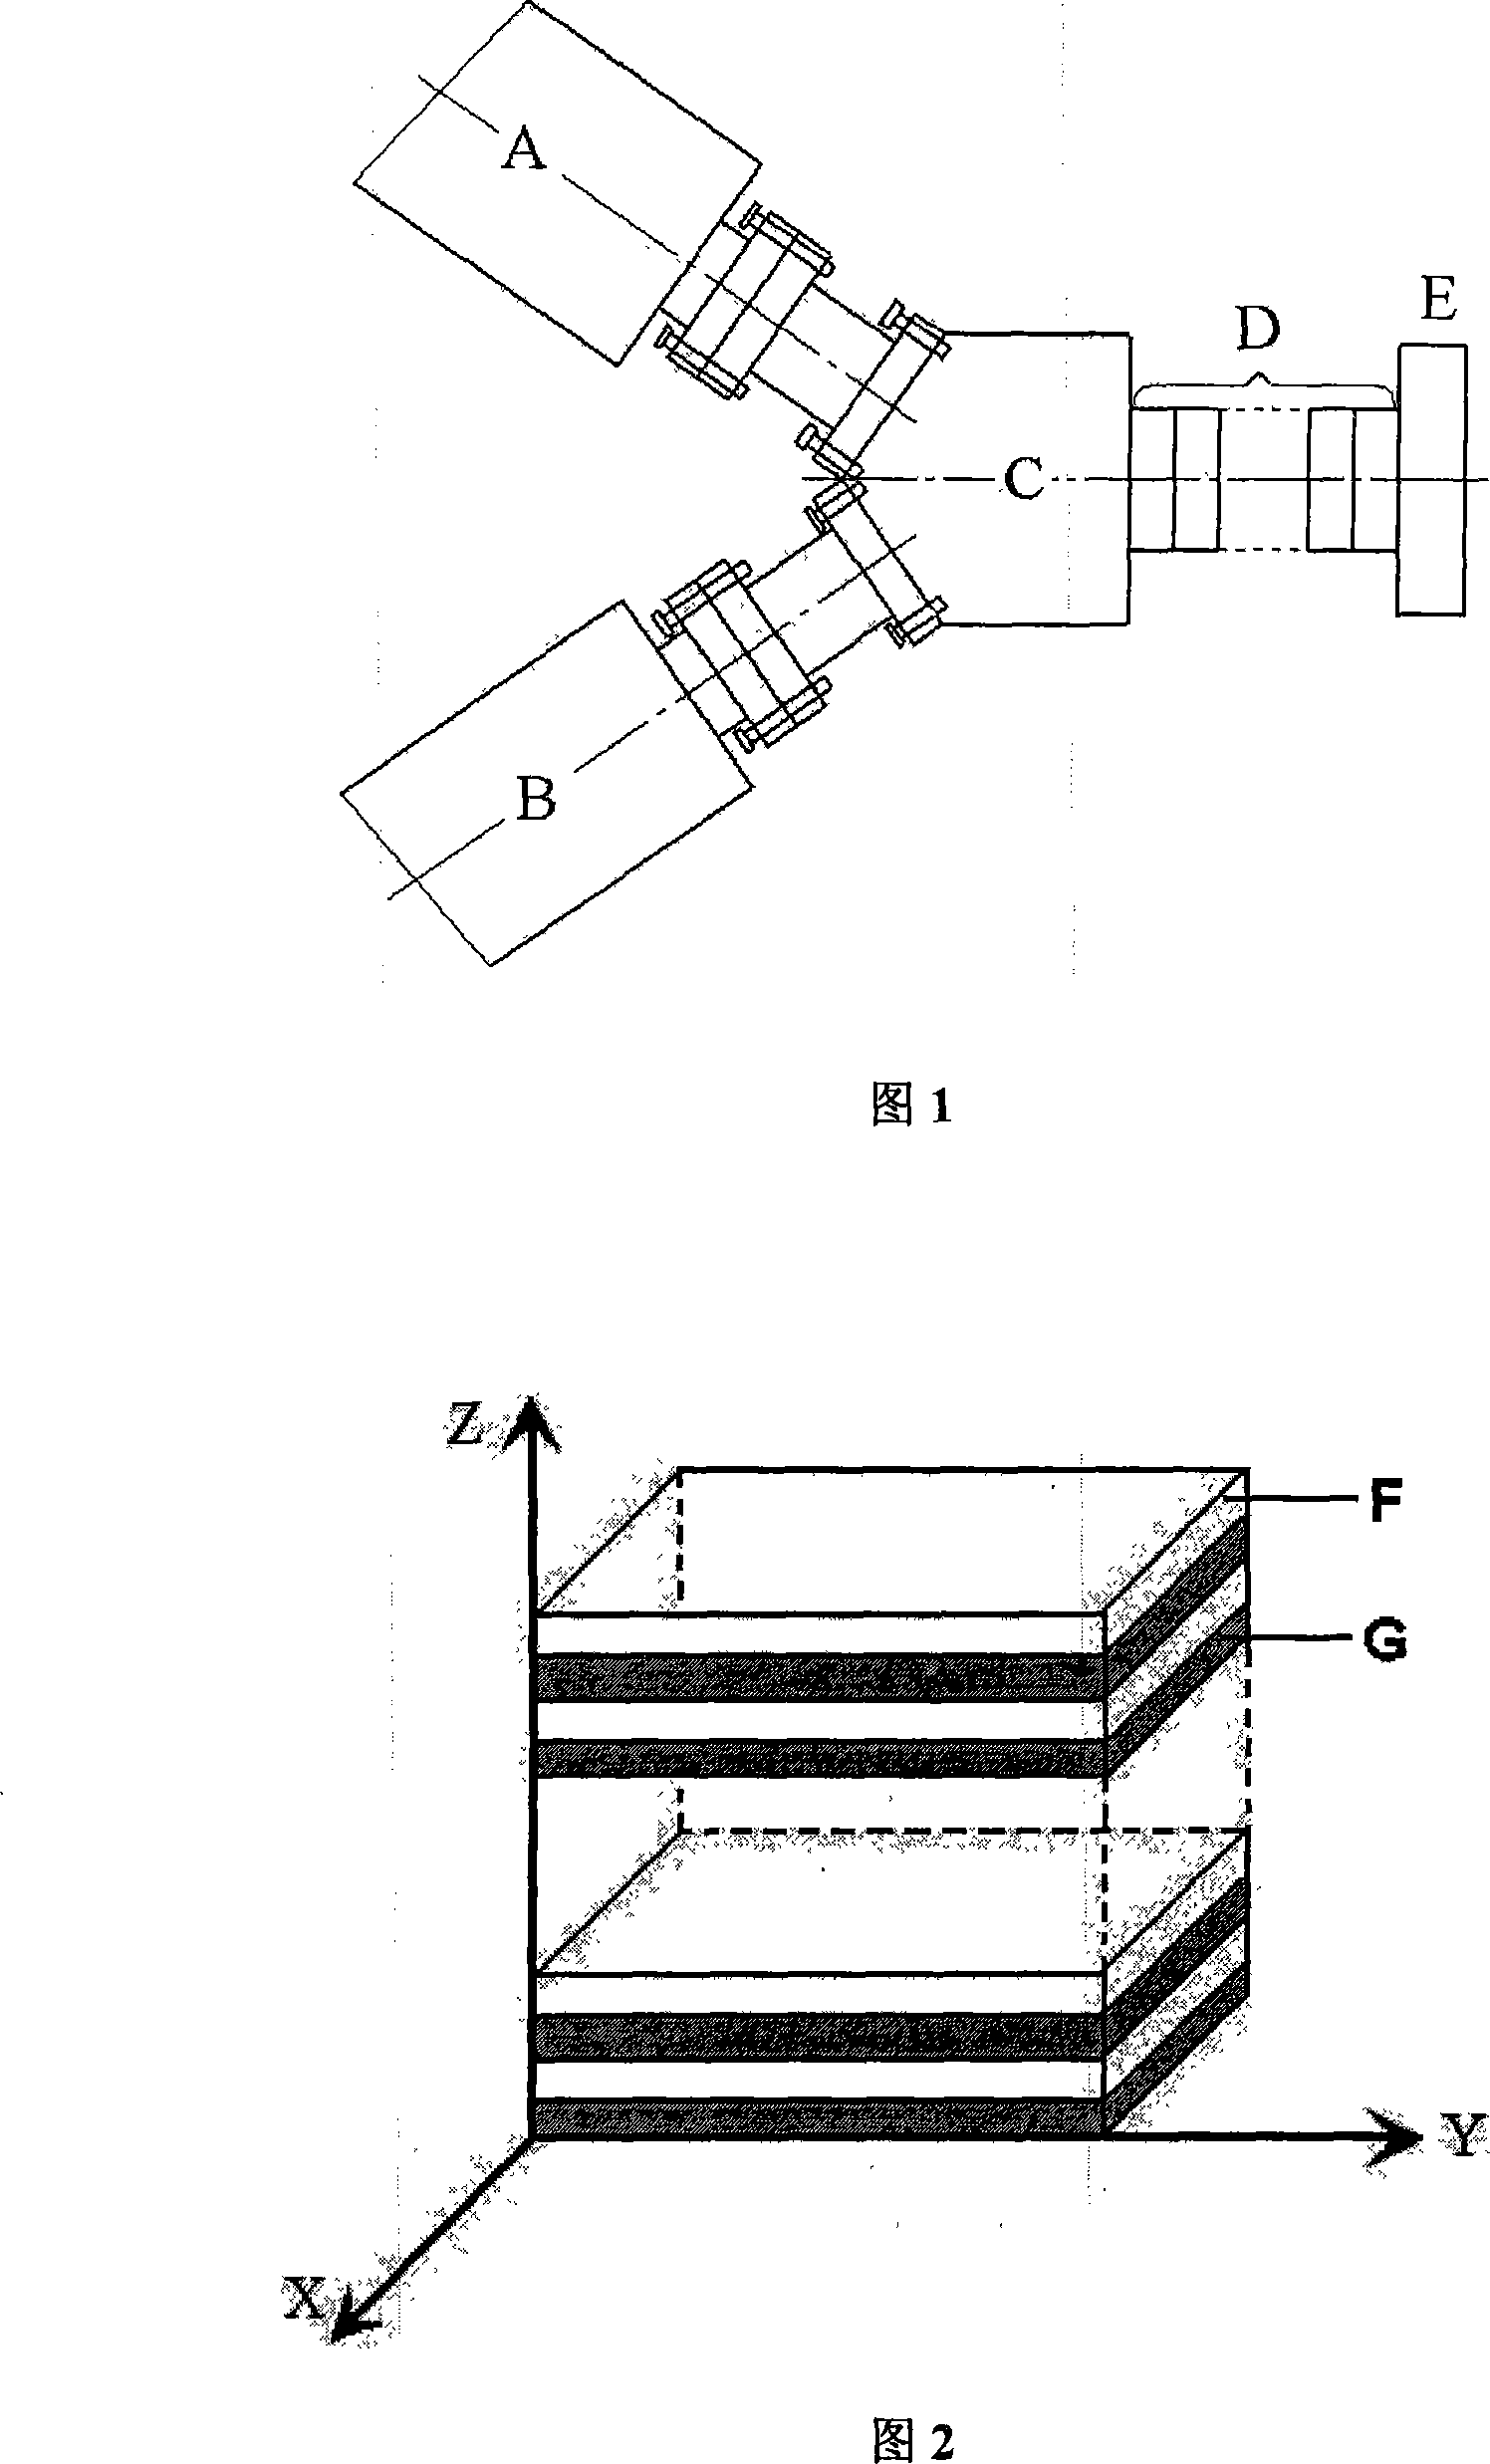 Method for preparing designable layered polymer base conductive composite material